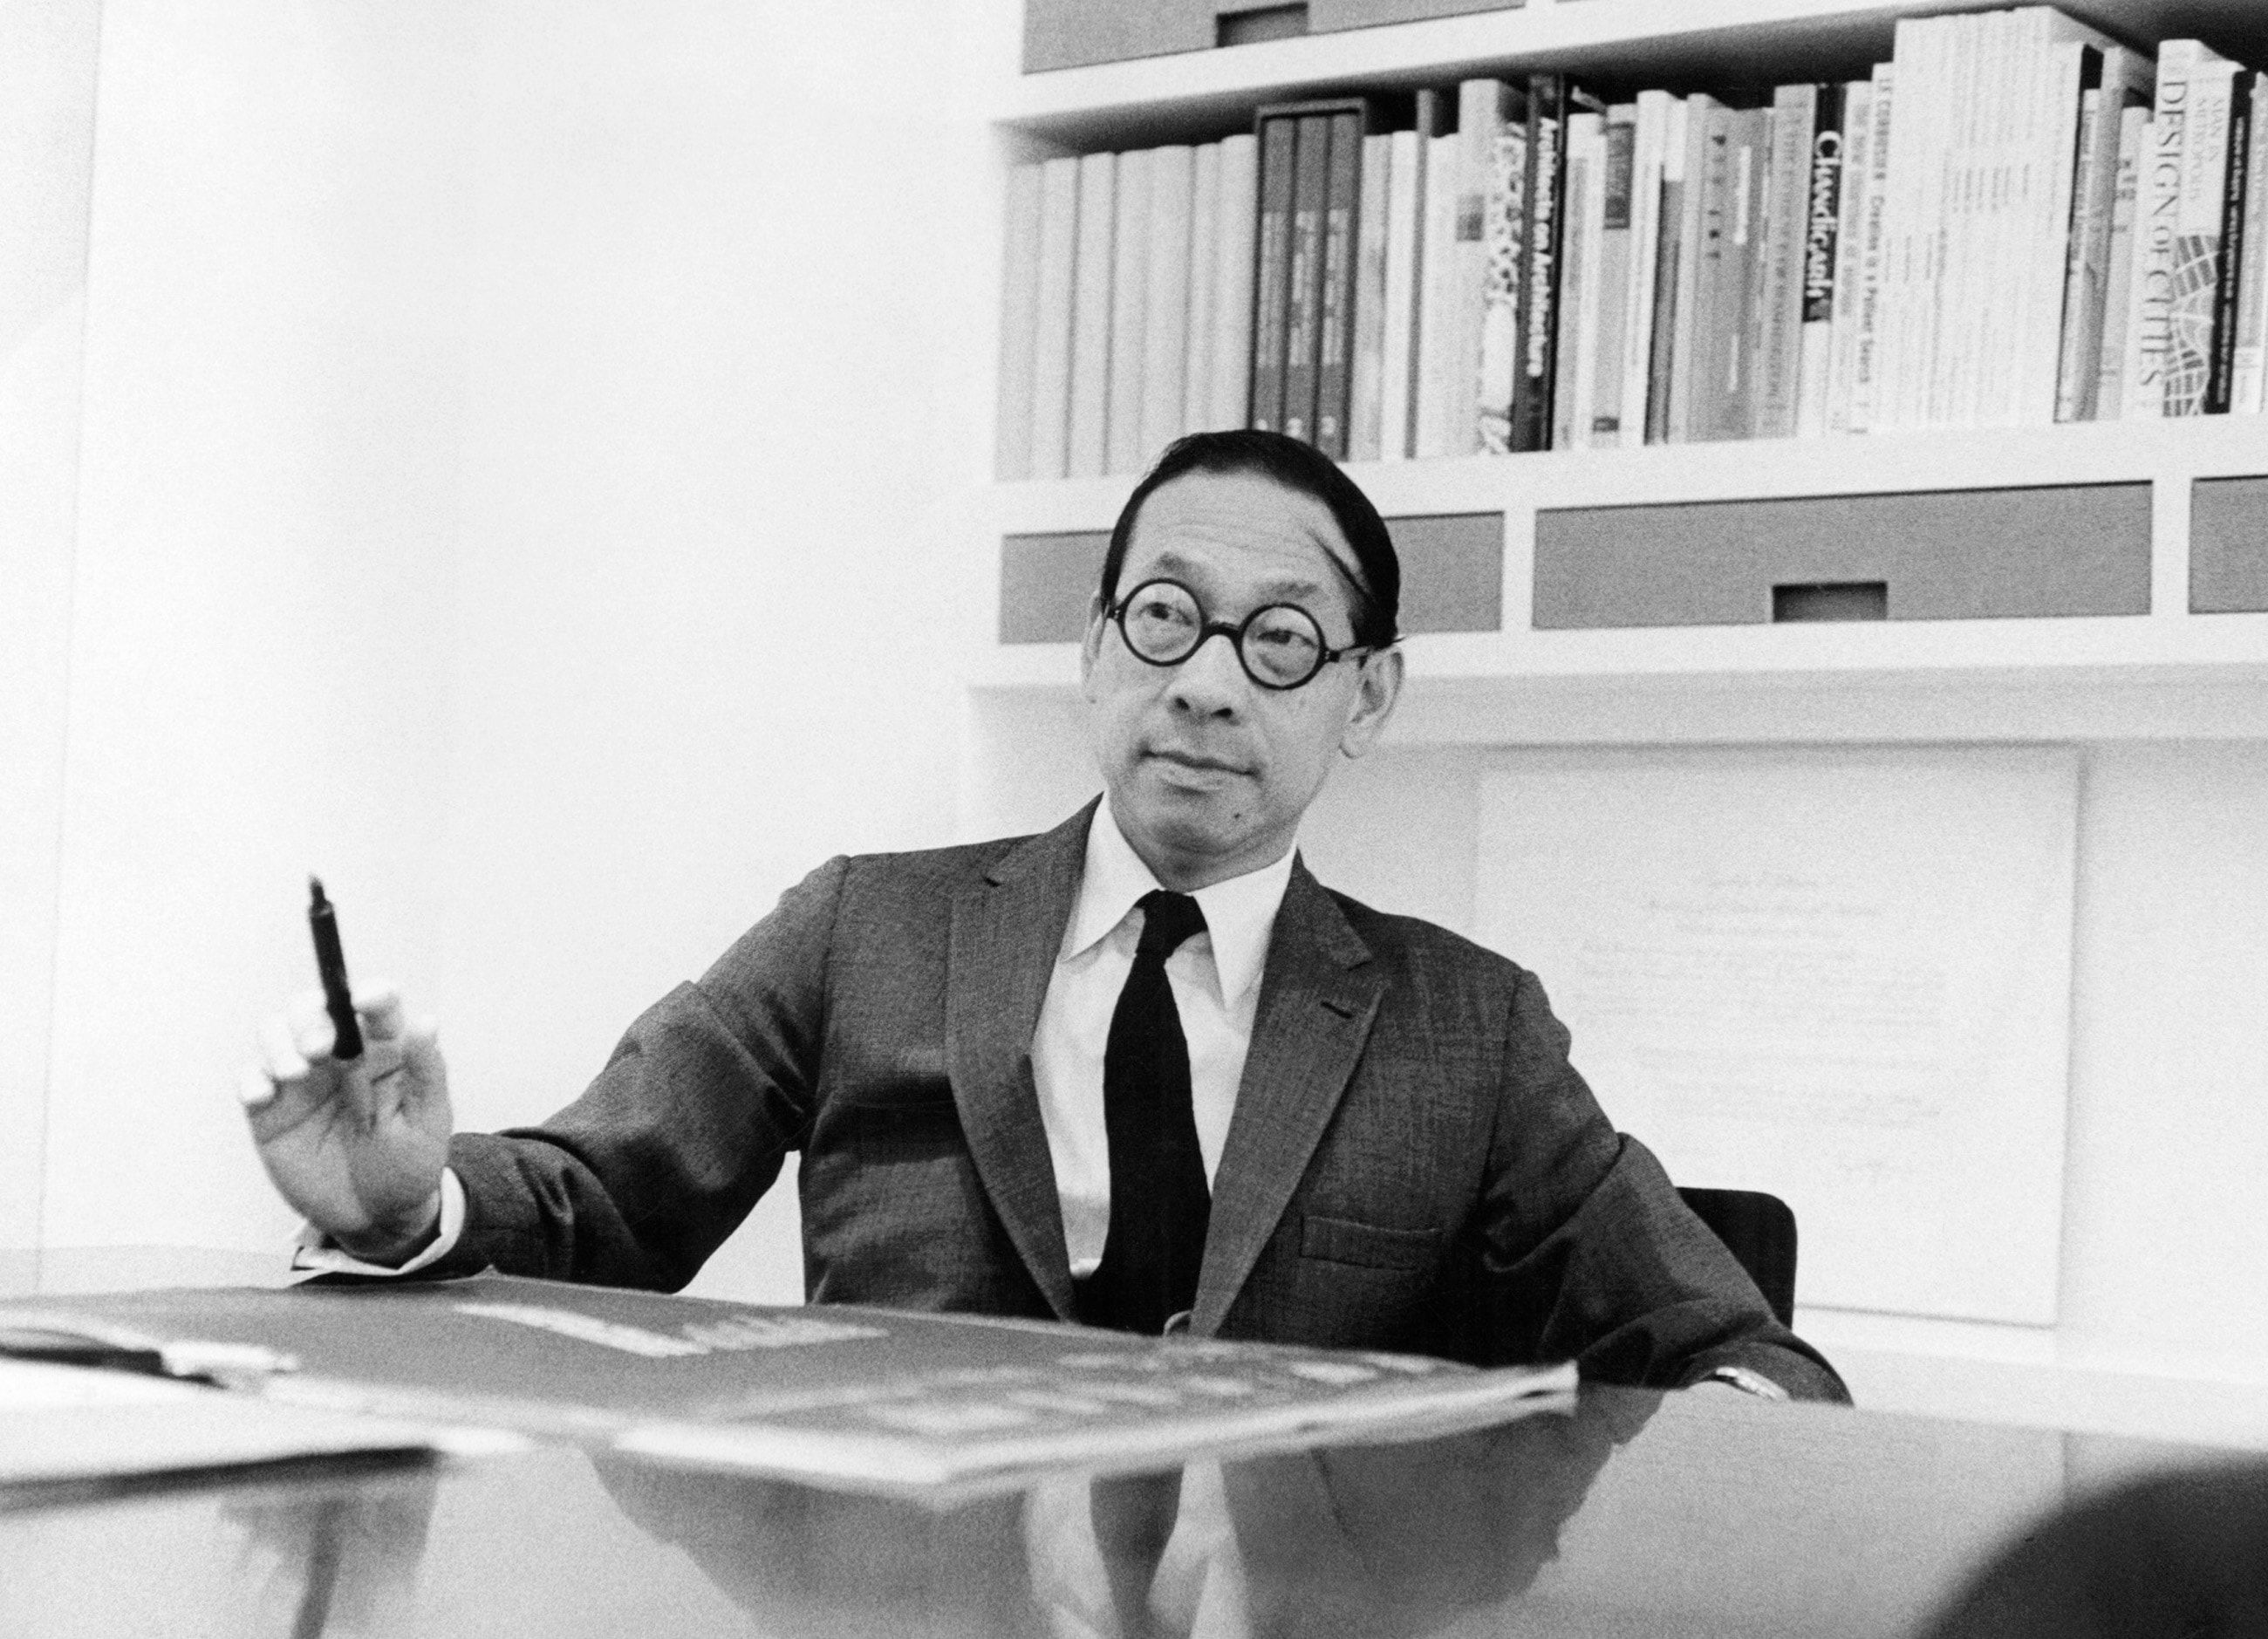 I.M. Pei’s art collection is going for auction at Christie’s